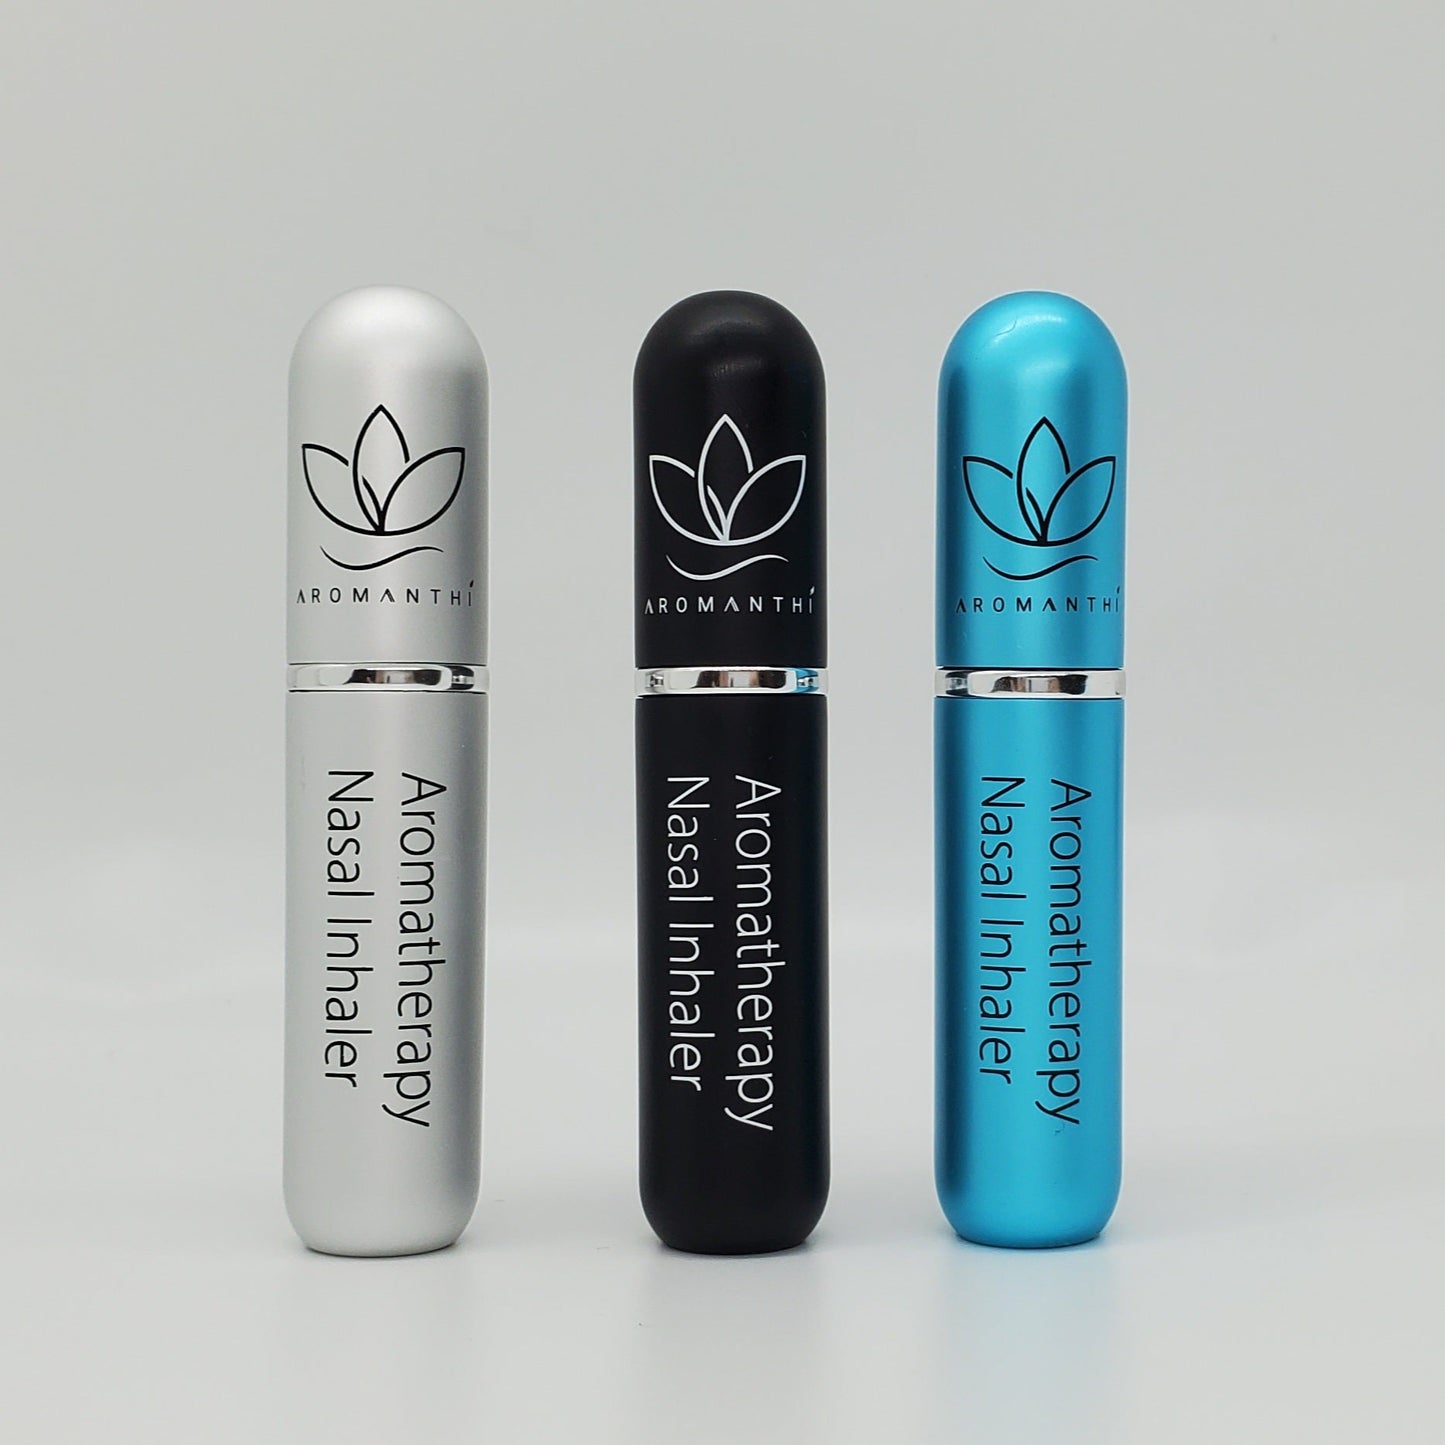 Aromatherapy nasal inhalers by aromanthi with 3 different colors to choose from- silver, black, and light blue